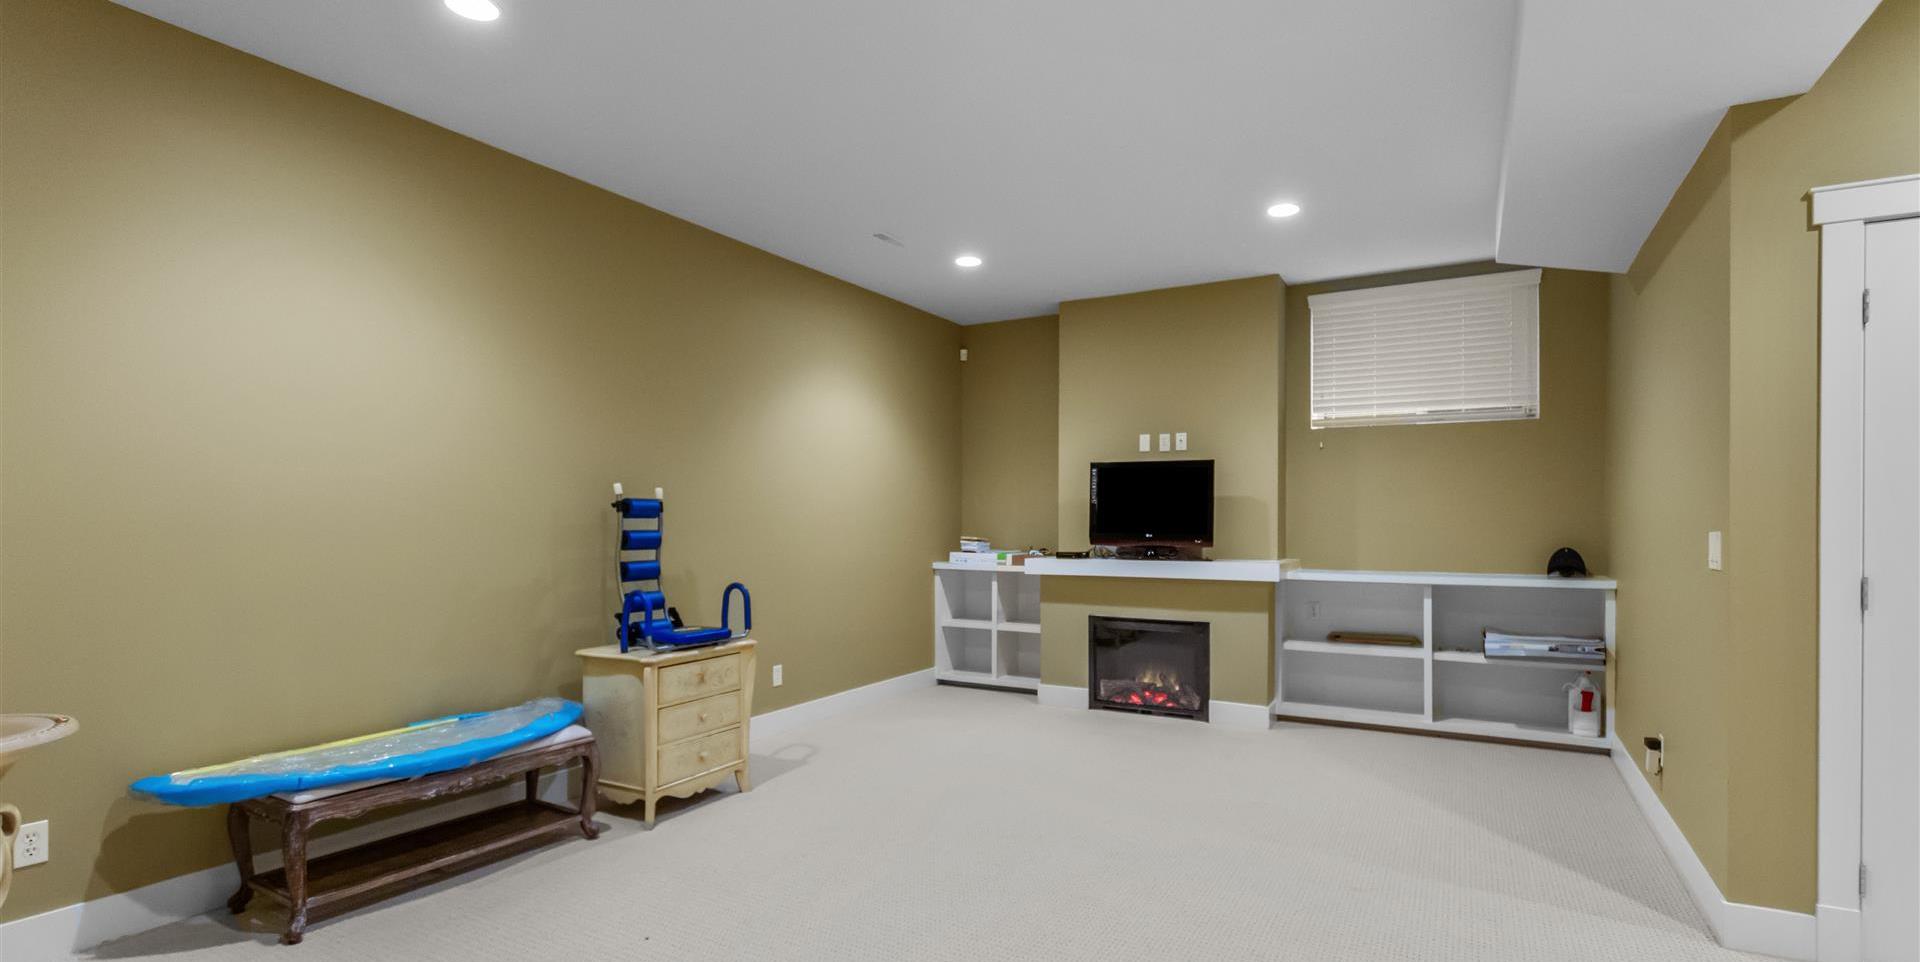 recreation room featuring a fireplace, carpet, and TV